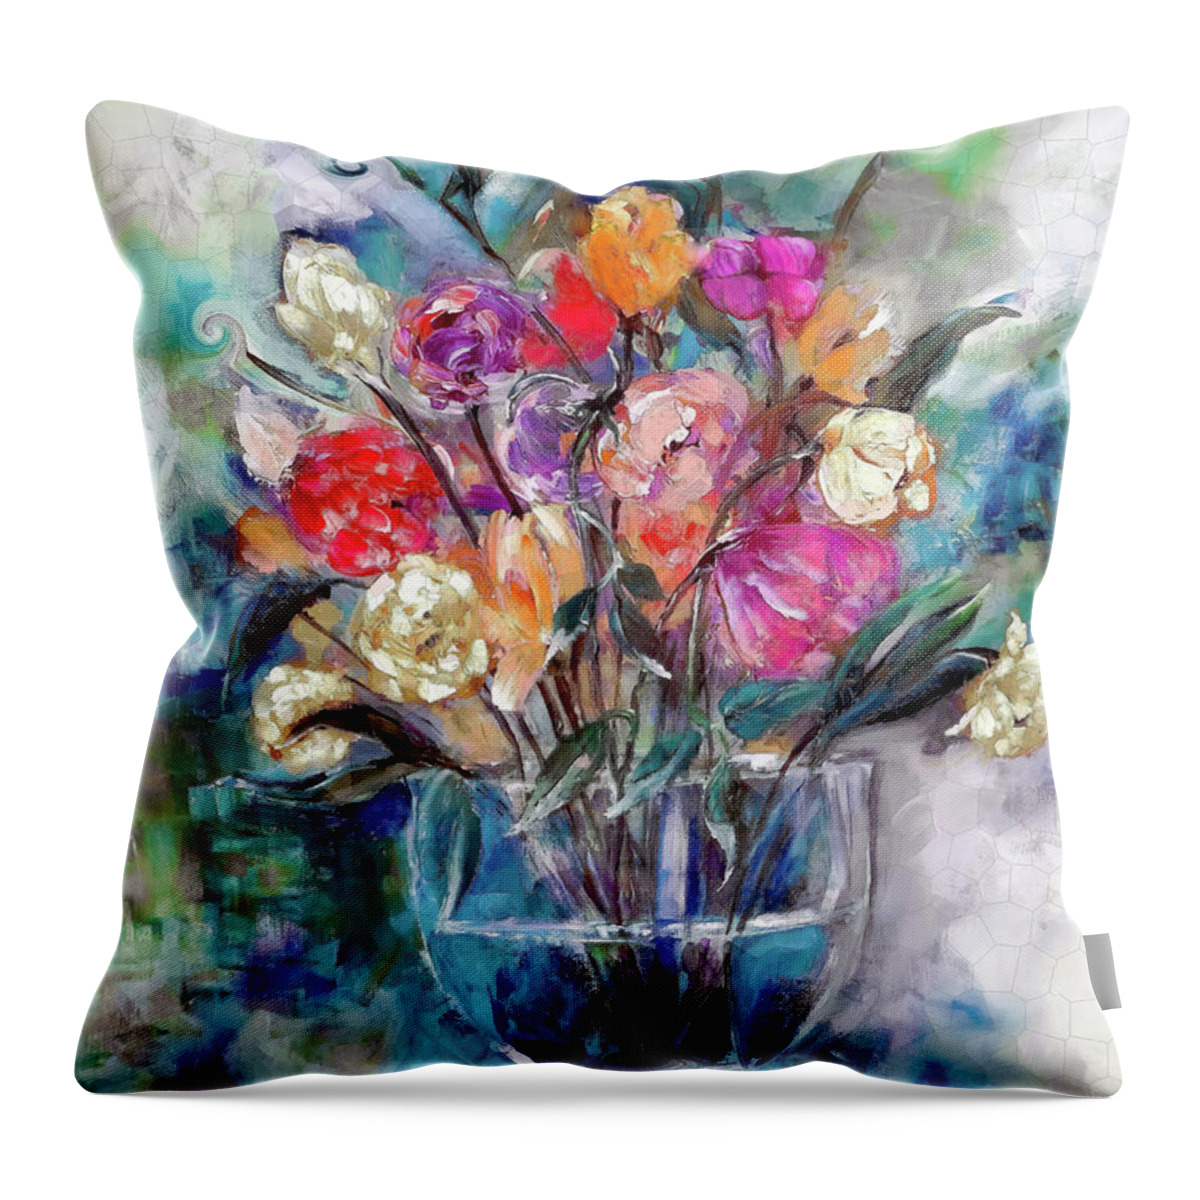 Contemporary Throw Pillow featuring the digital art Contemporary February Floral by Lisa Kaiser